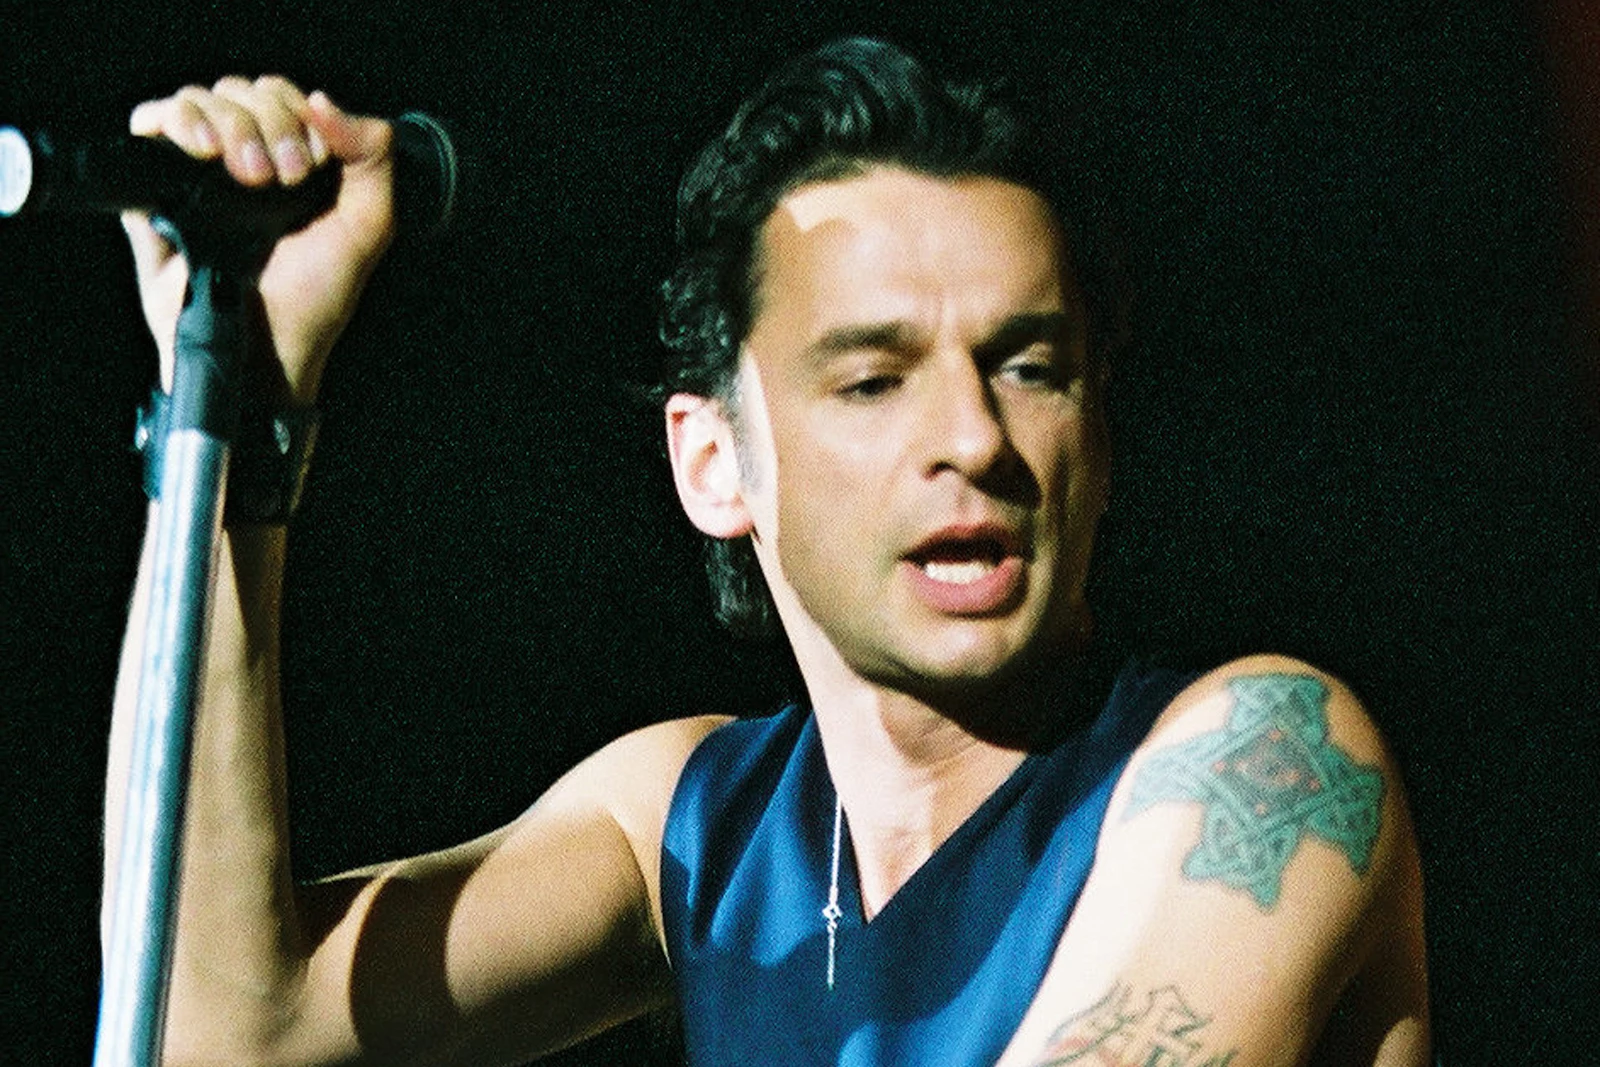 25 Years Ago: Depeche Mode's Dave Gahan Briefly Dies